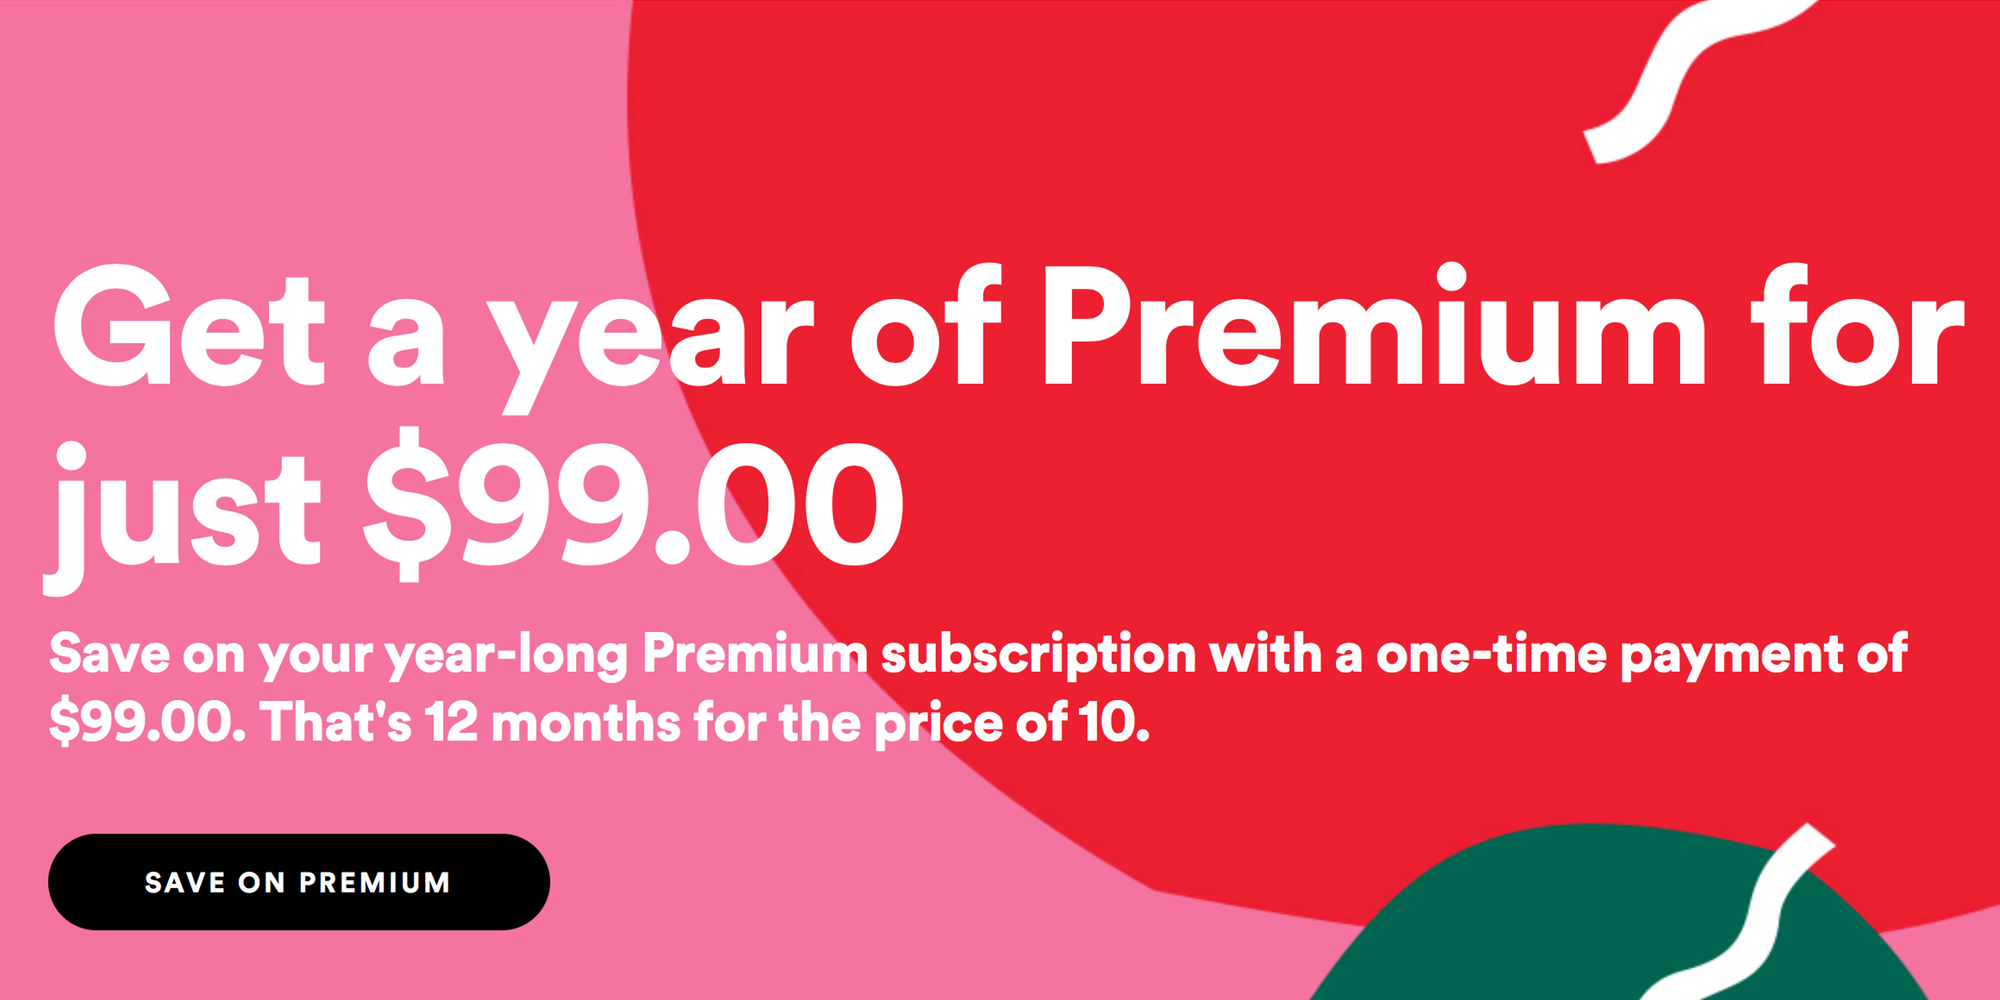 score-a-spotify-premium-1-year-subscription-for-99-just-in-time-for